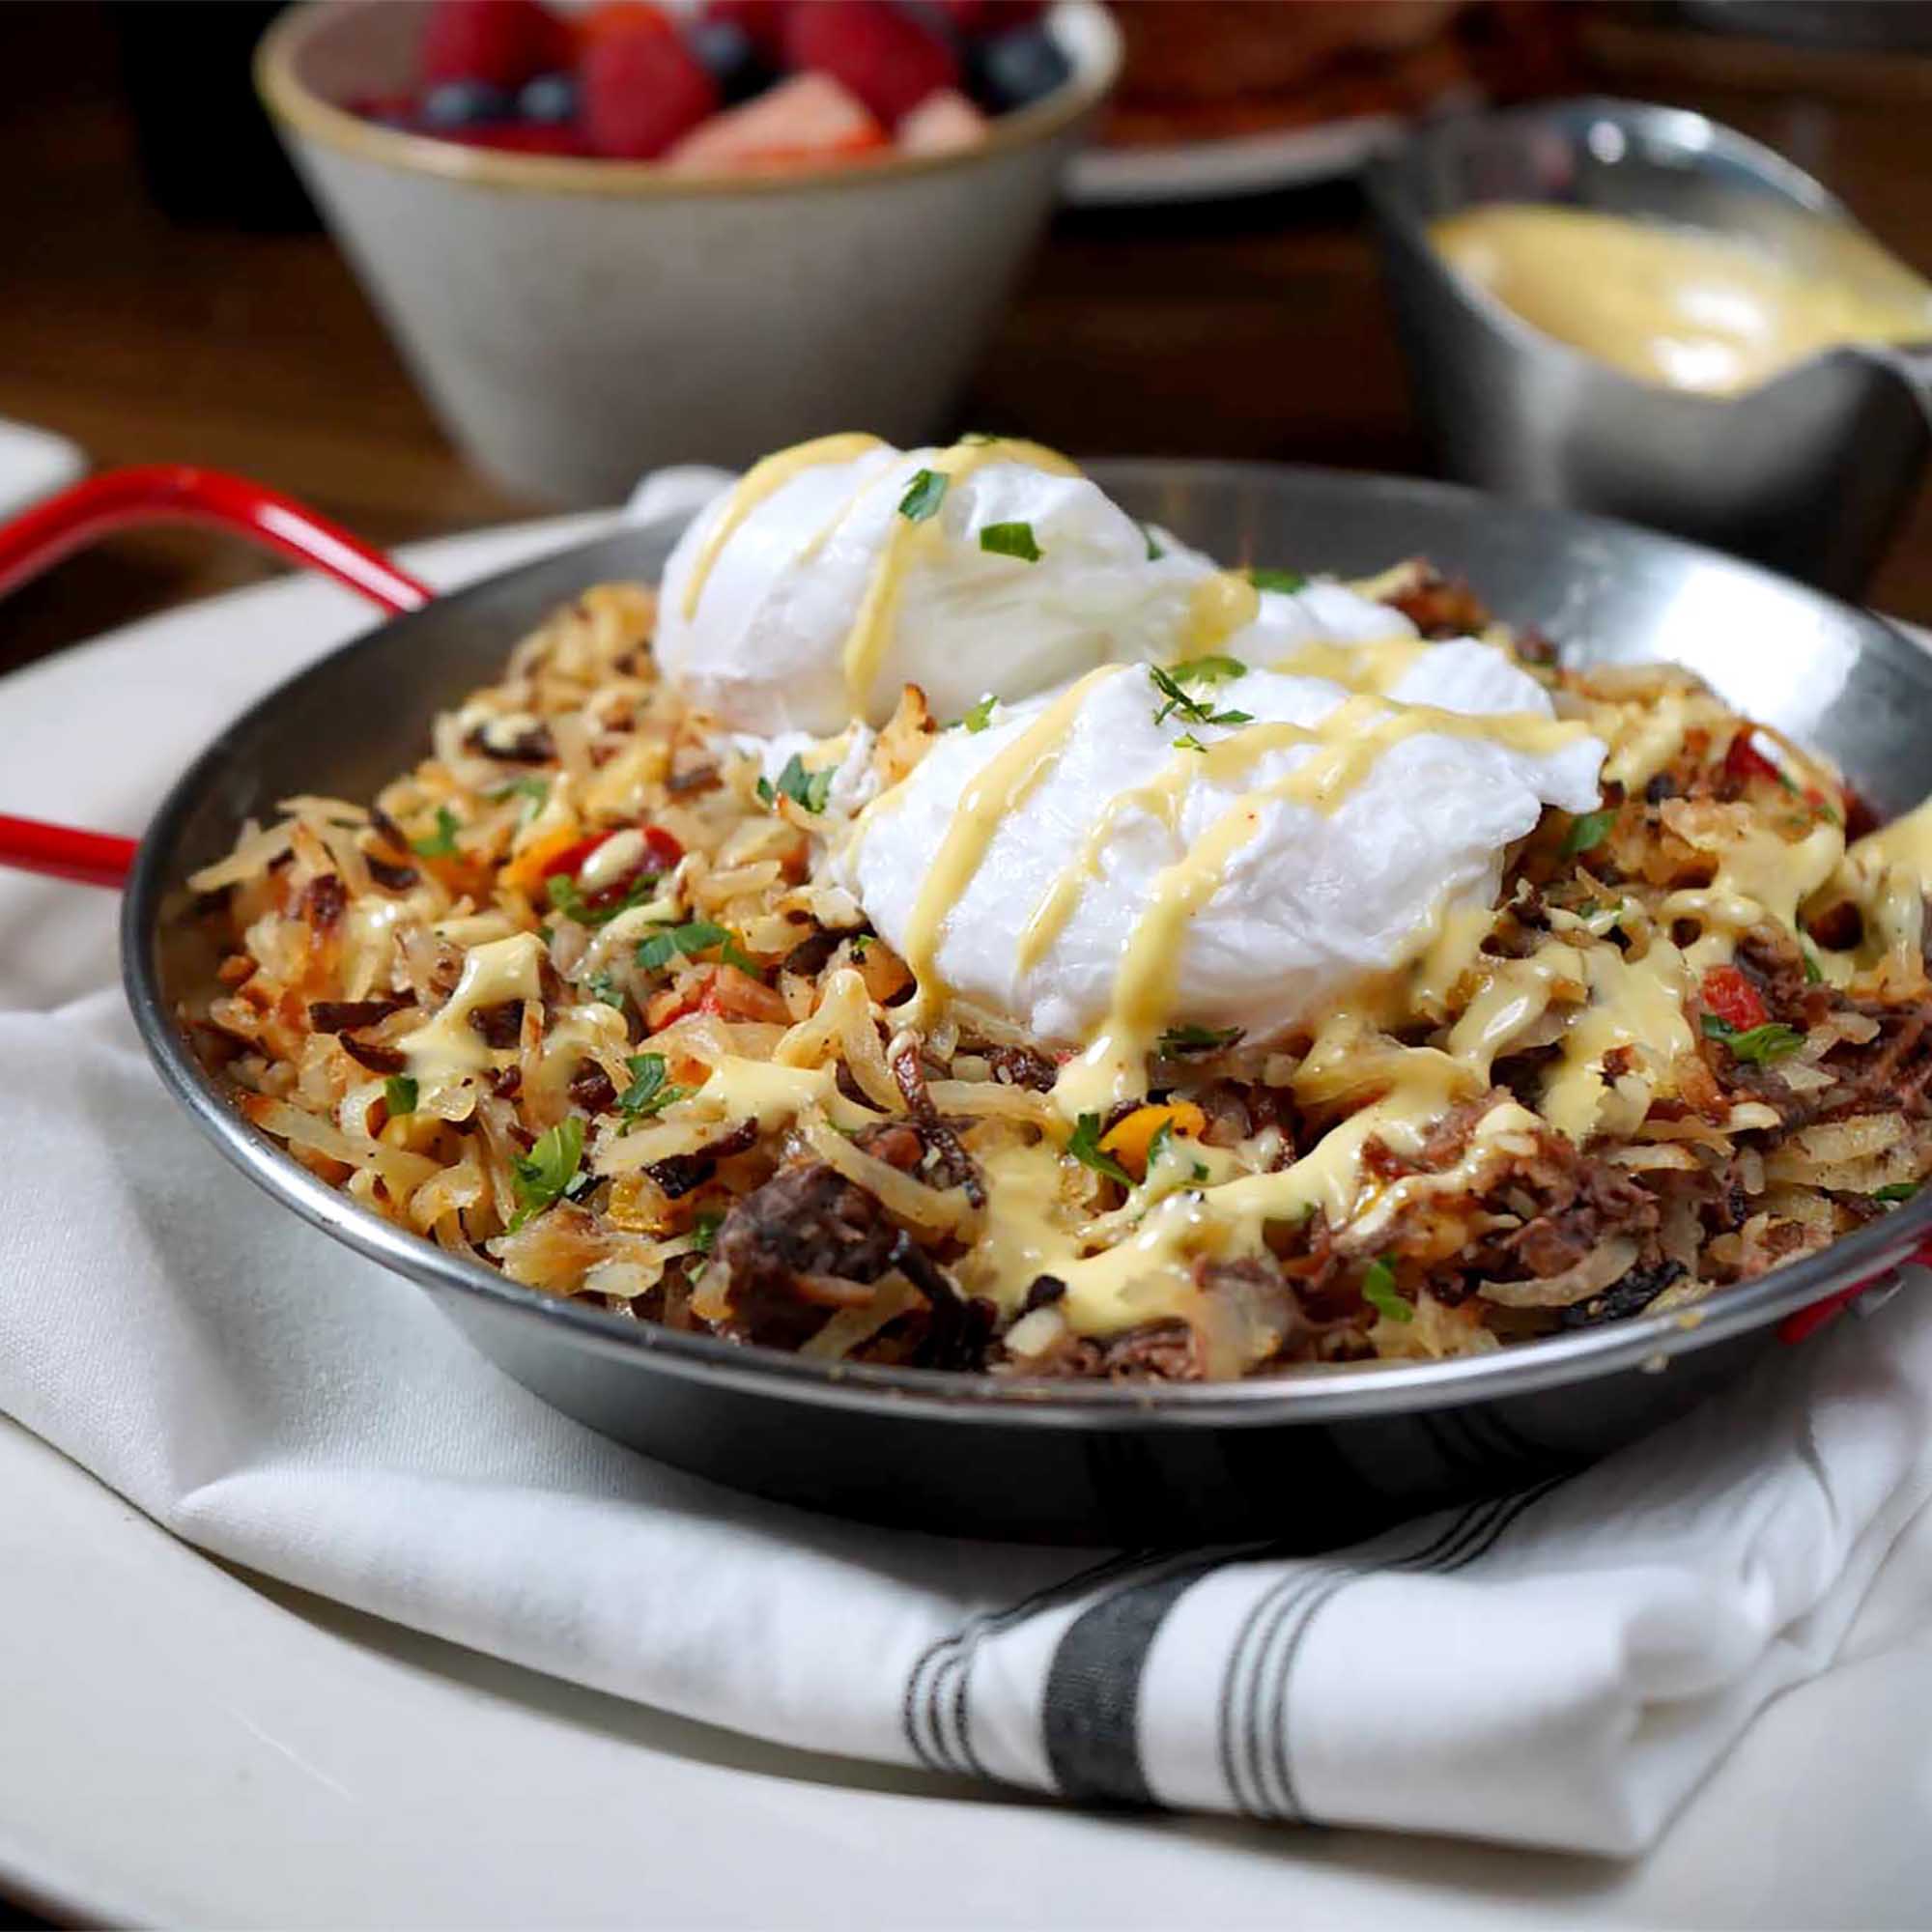 Short rib hash served in a sizzling pan for Burtons weekend brunch